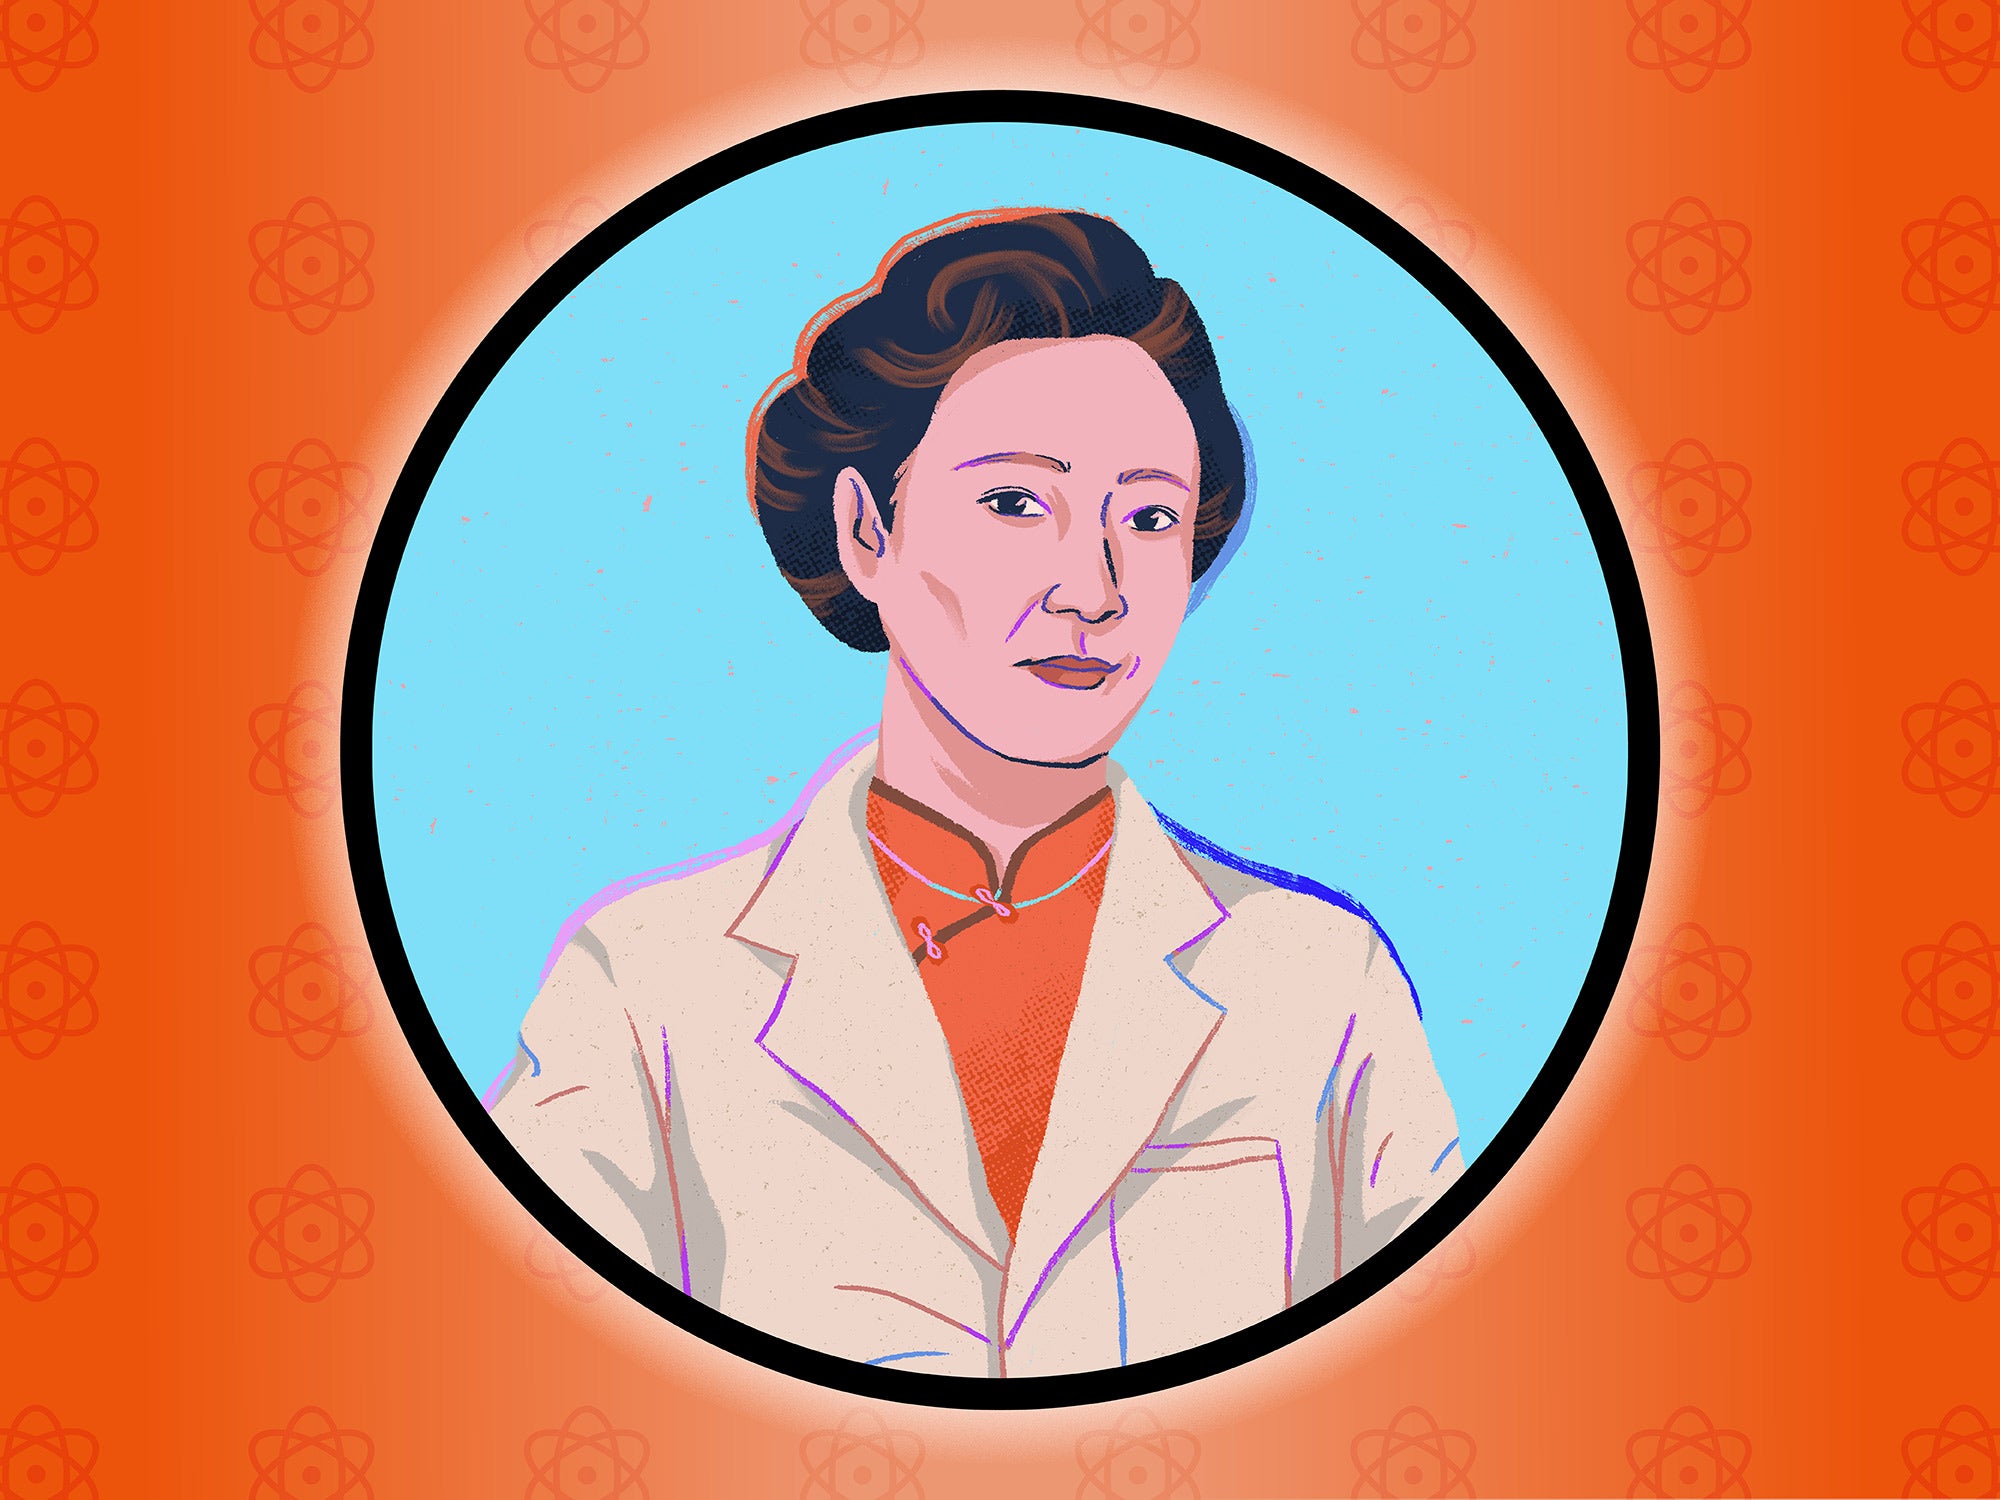 Chien-Shiung Wu's work defied the laws of physics